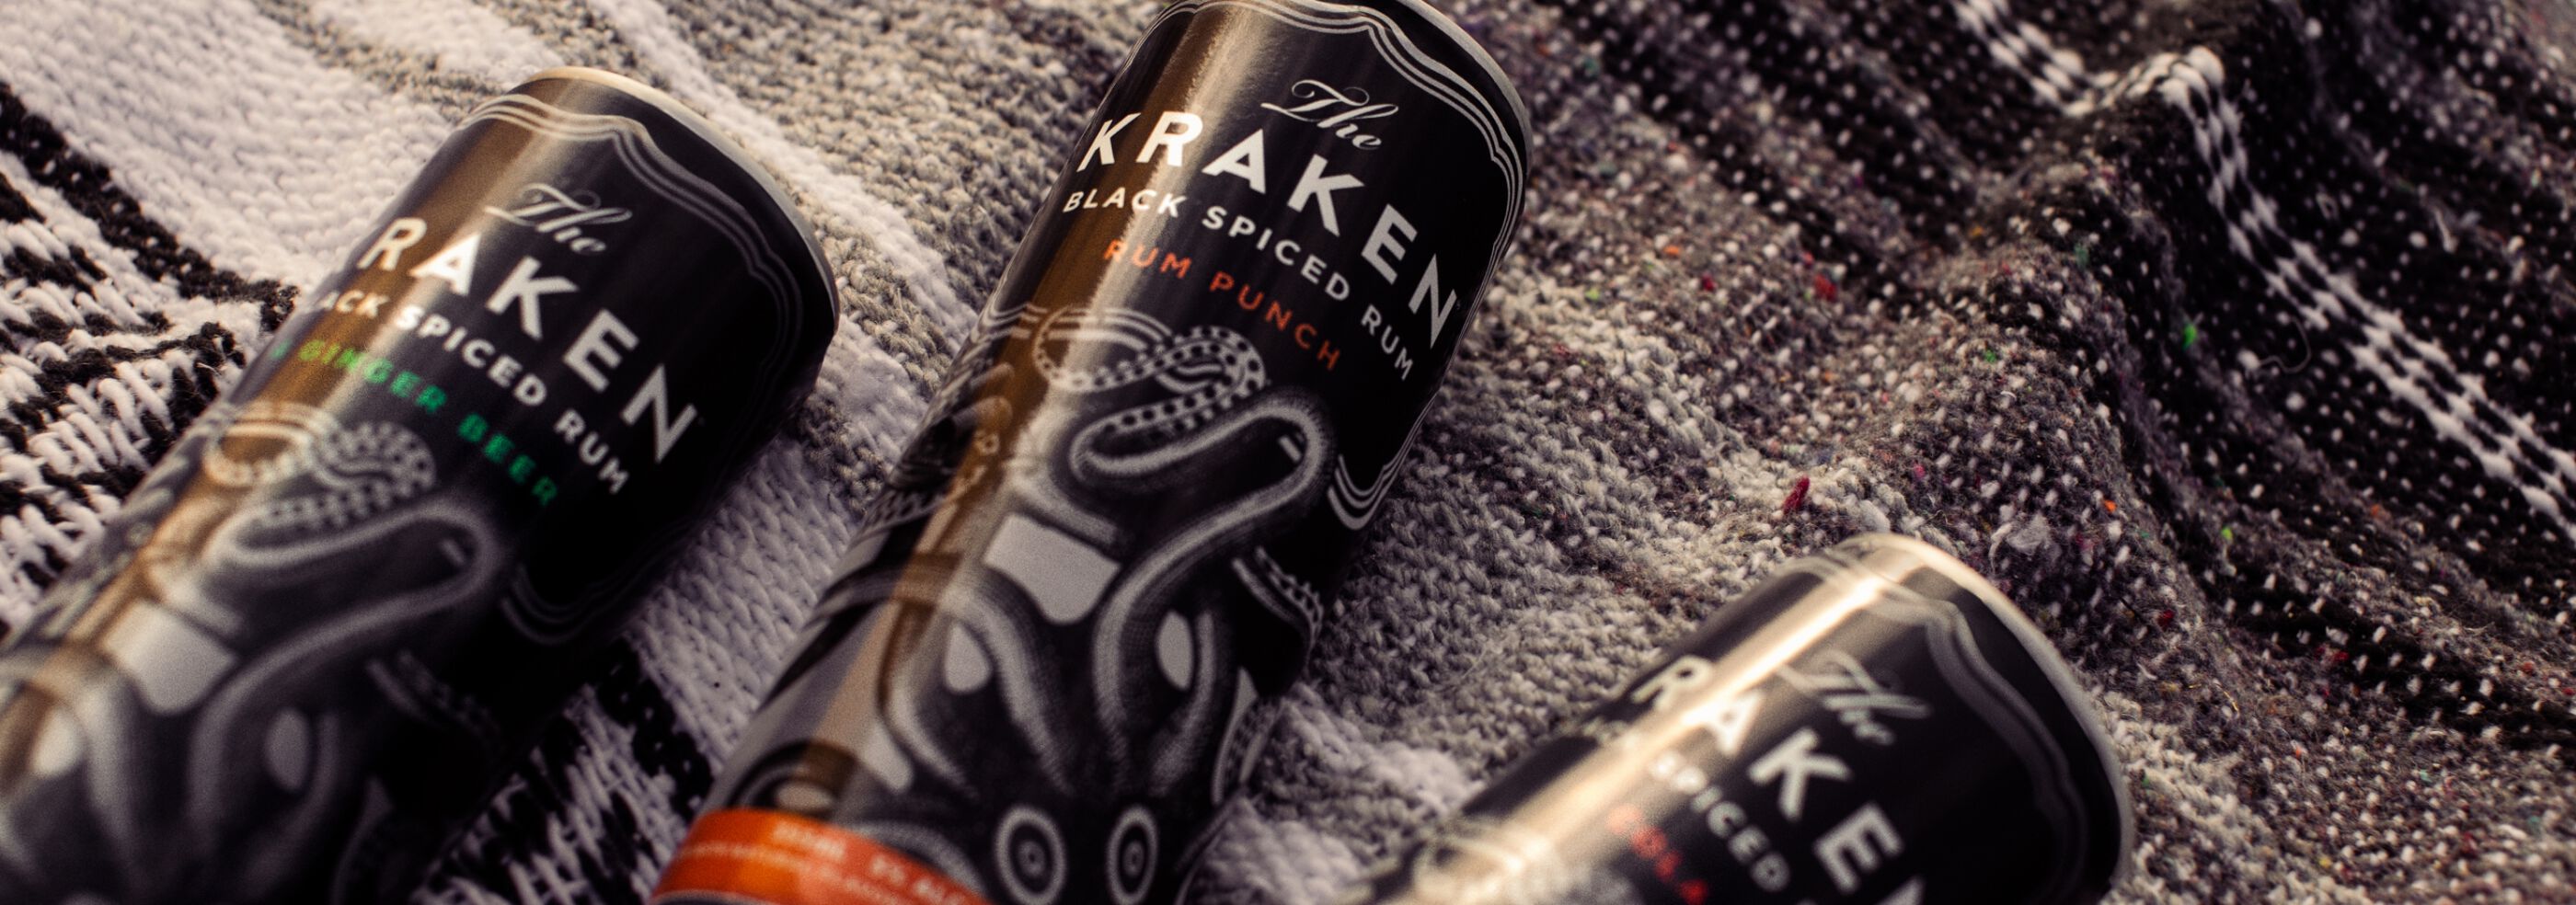 The Kraken Canned Cocktails on a beach blanket